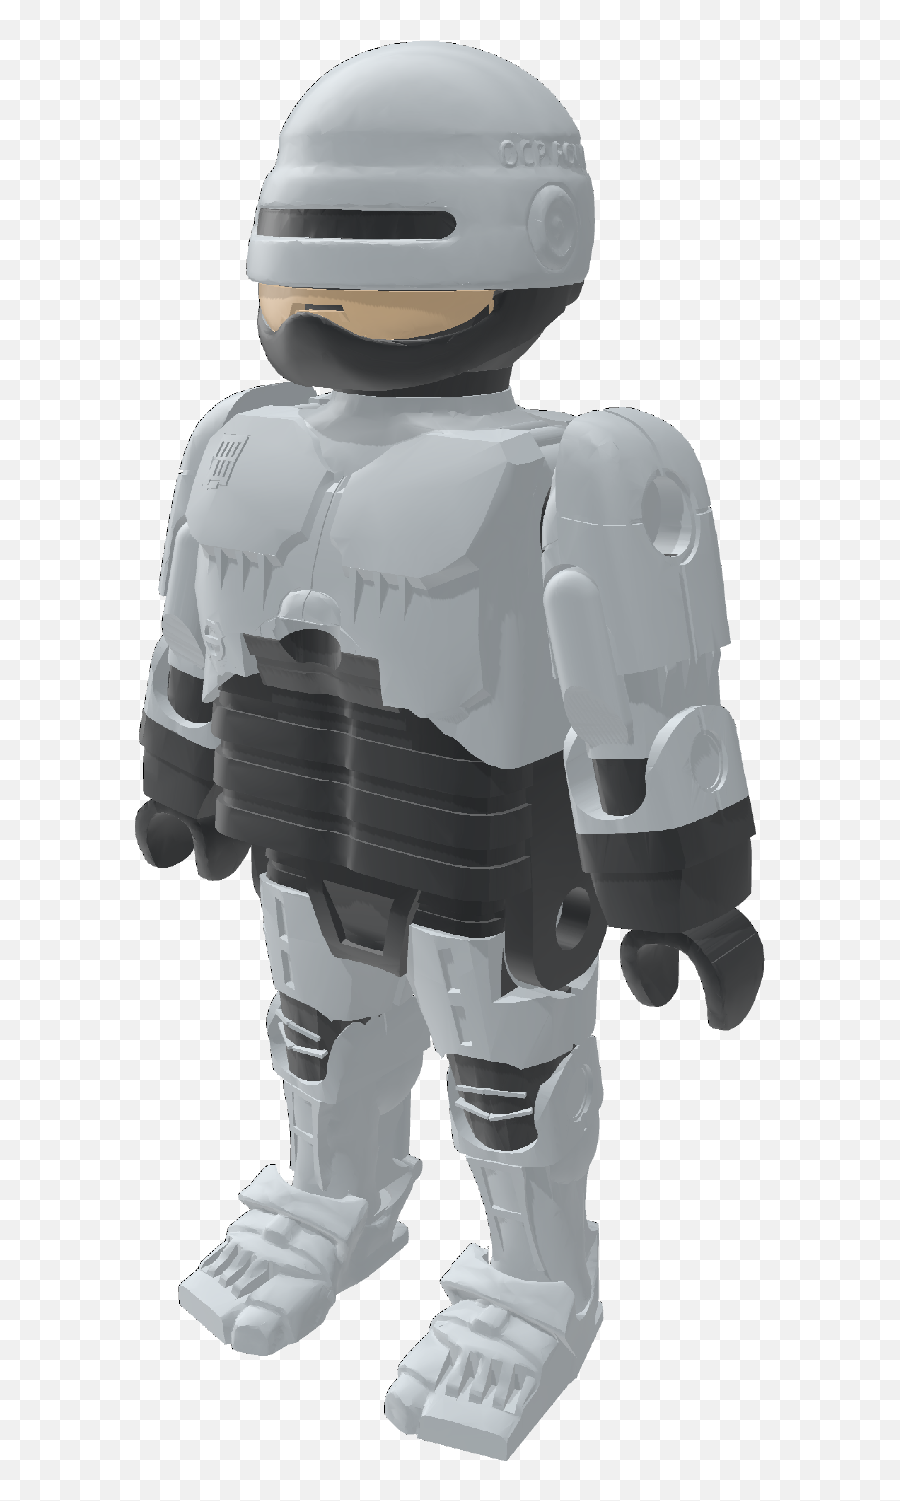 Robocop Playmobil - Playmobil Robocop Png,Robocop Png